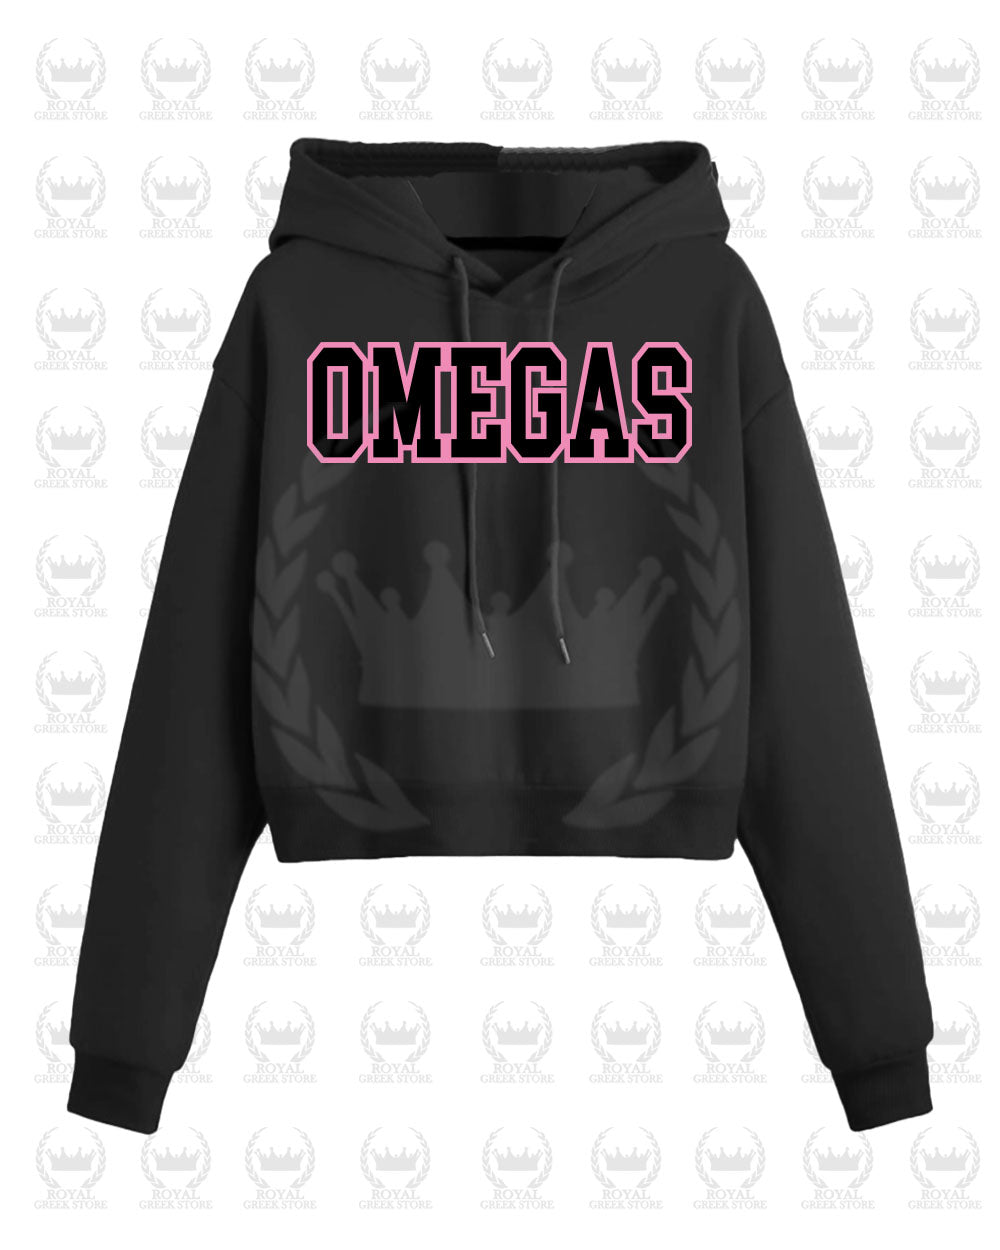 OMEGAS Cropped Hoodie 20% OFF